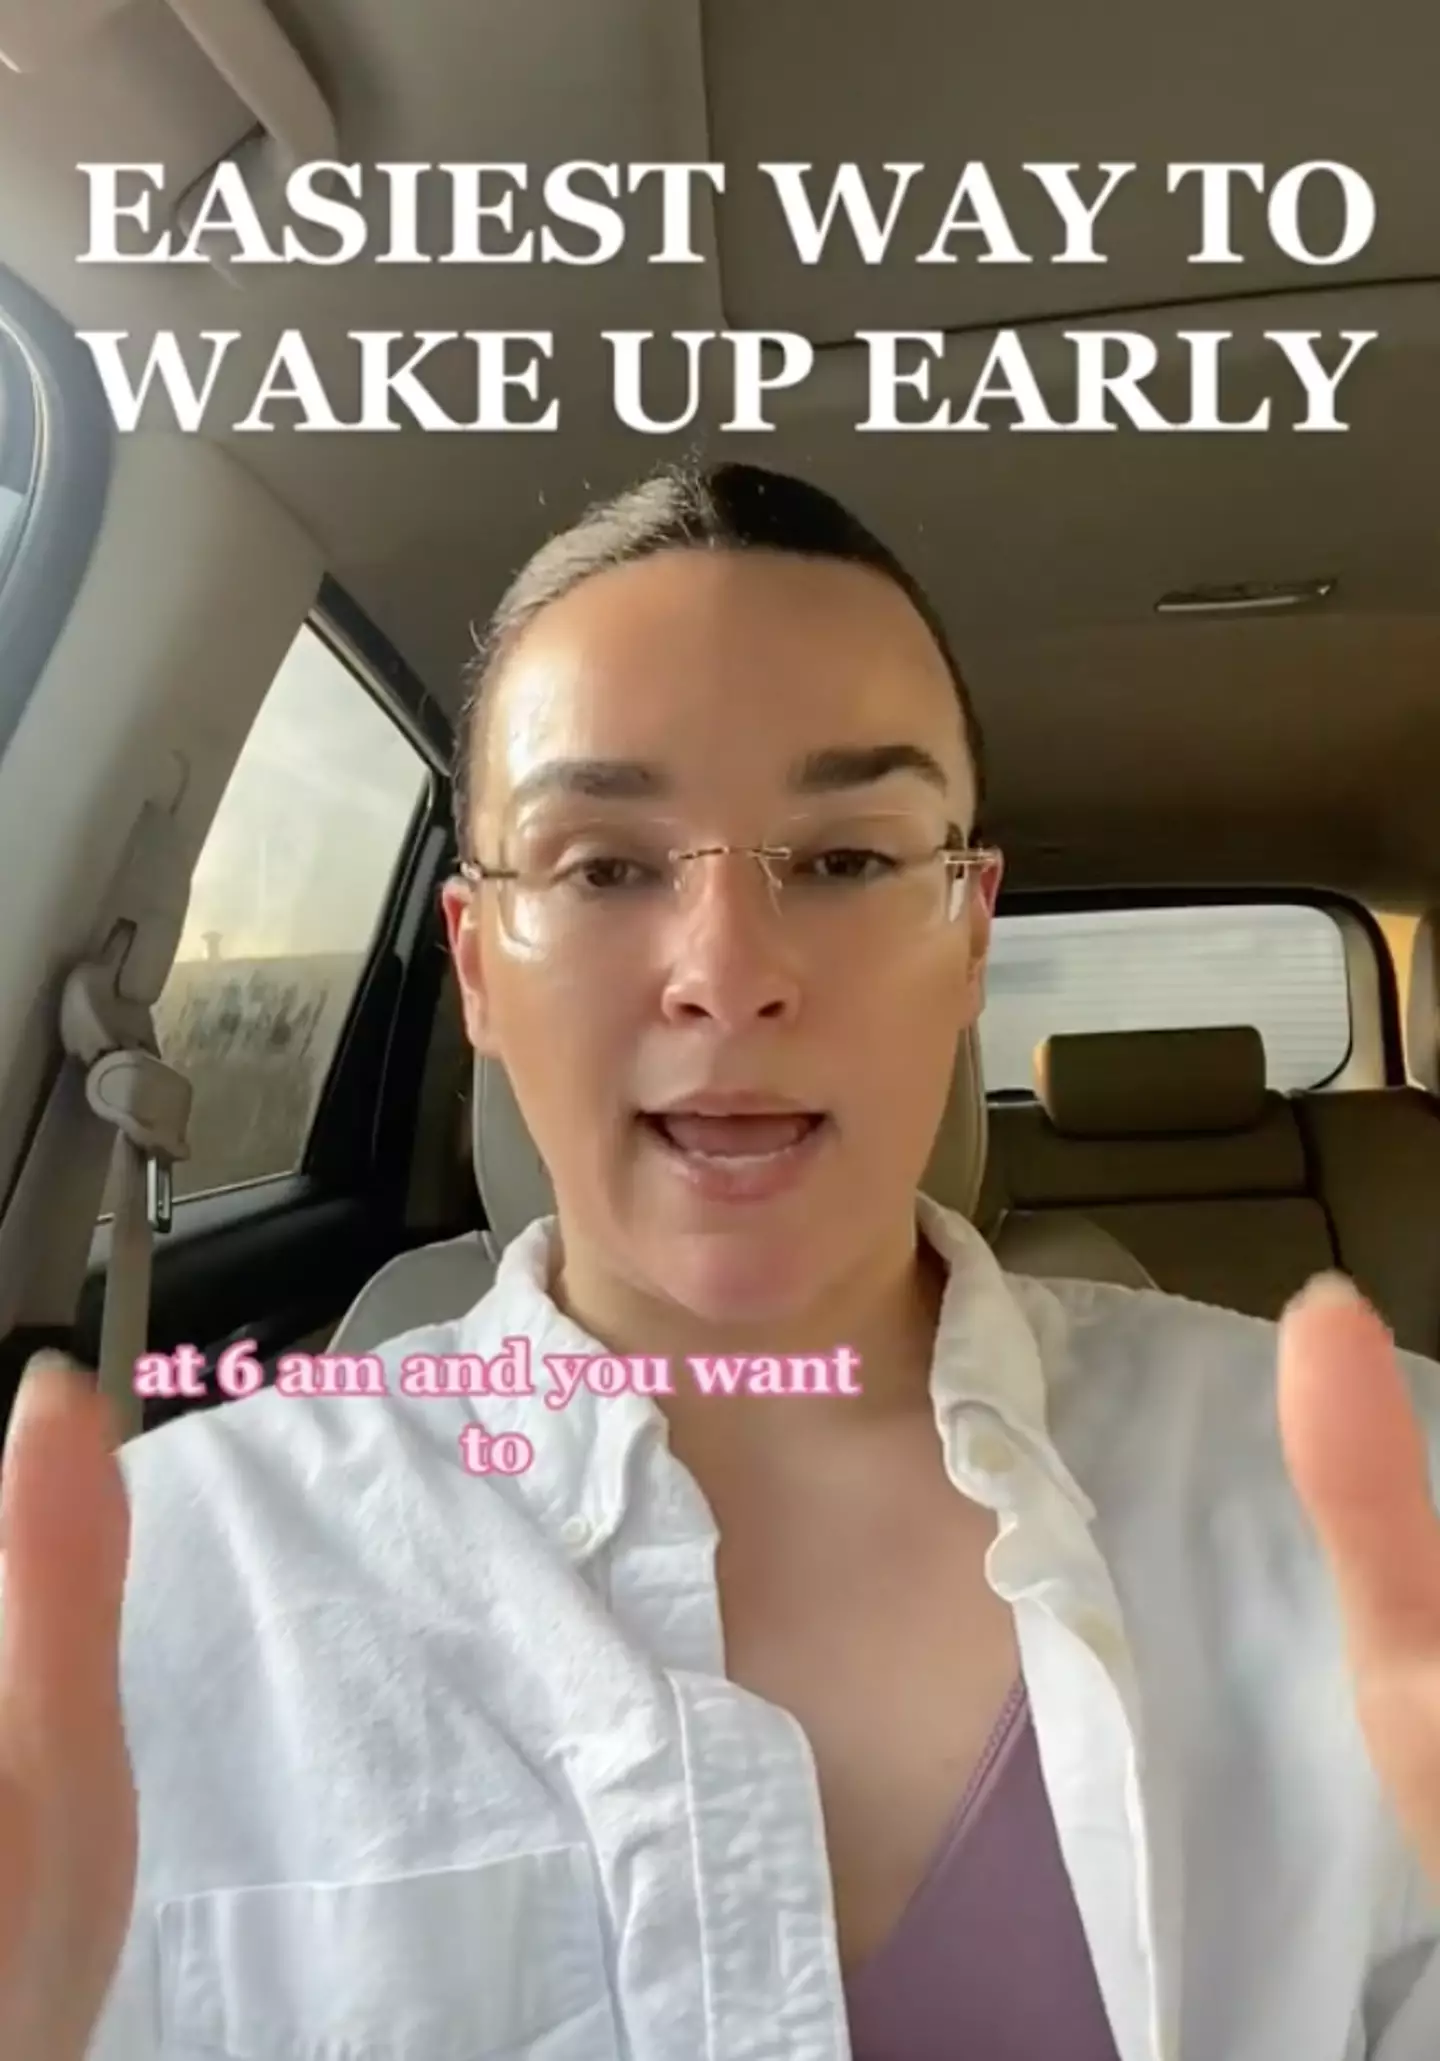 The TikTok star has revealed the easiest way to get up early in the winter.